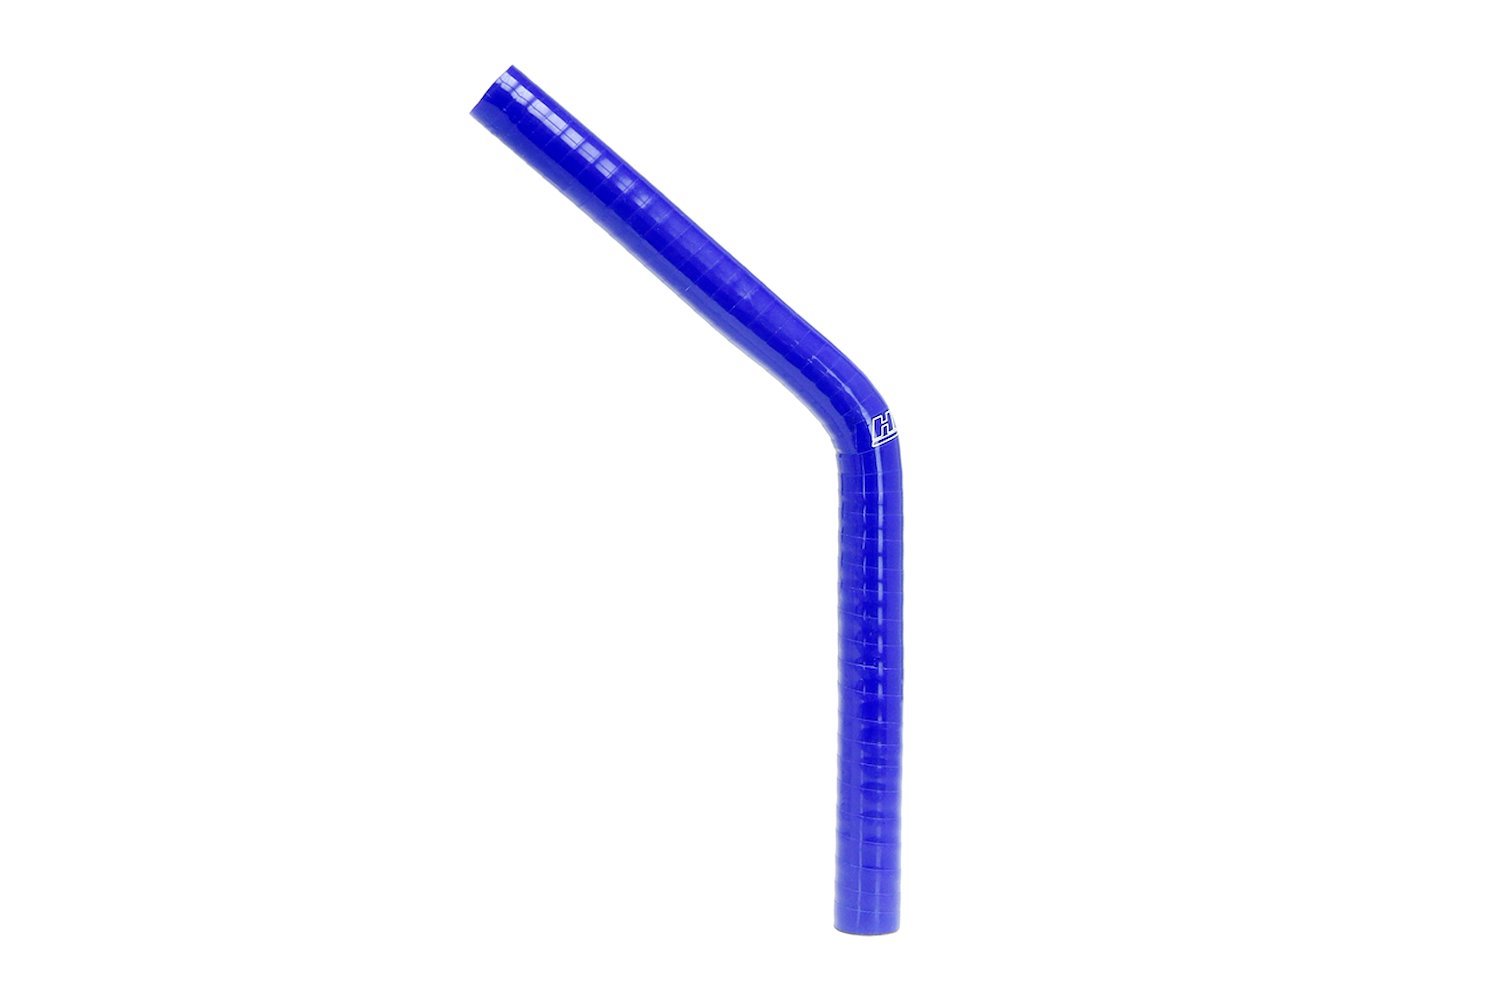 HTSEC45-050-BLUE Silicone 45-Degree Elbow Coupler Hose, High-Temp 4-Ply Reinforced, 1/2 in. ID, Blue